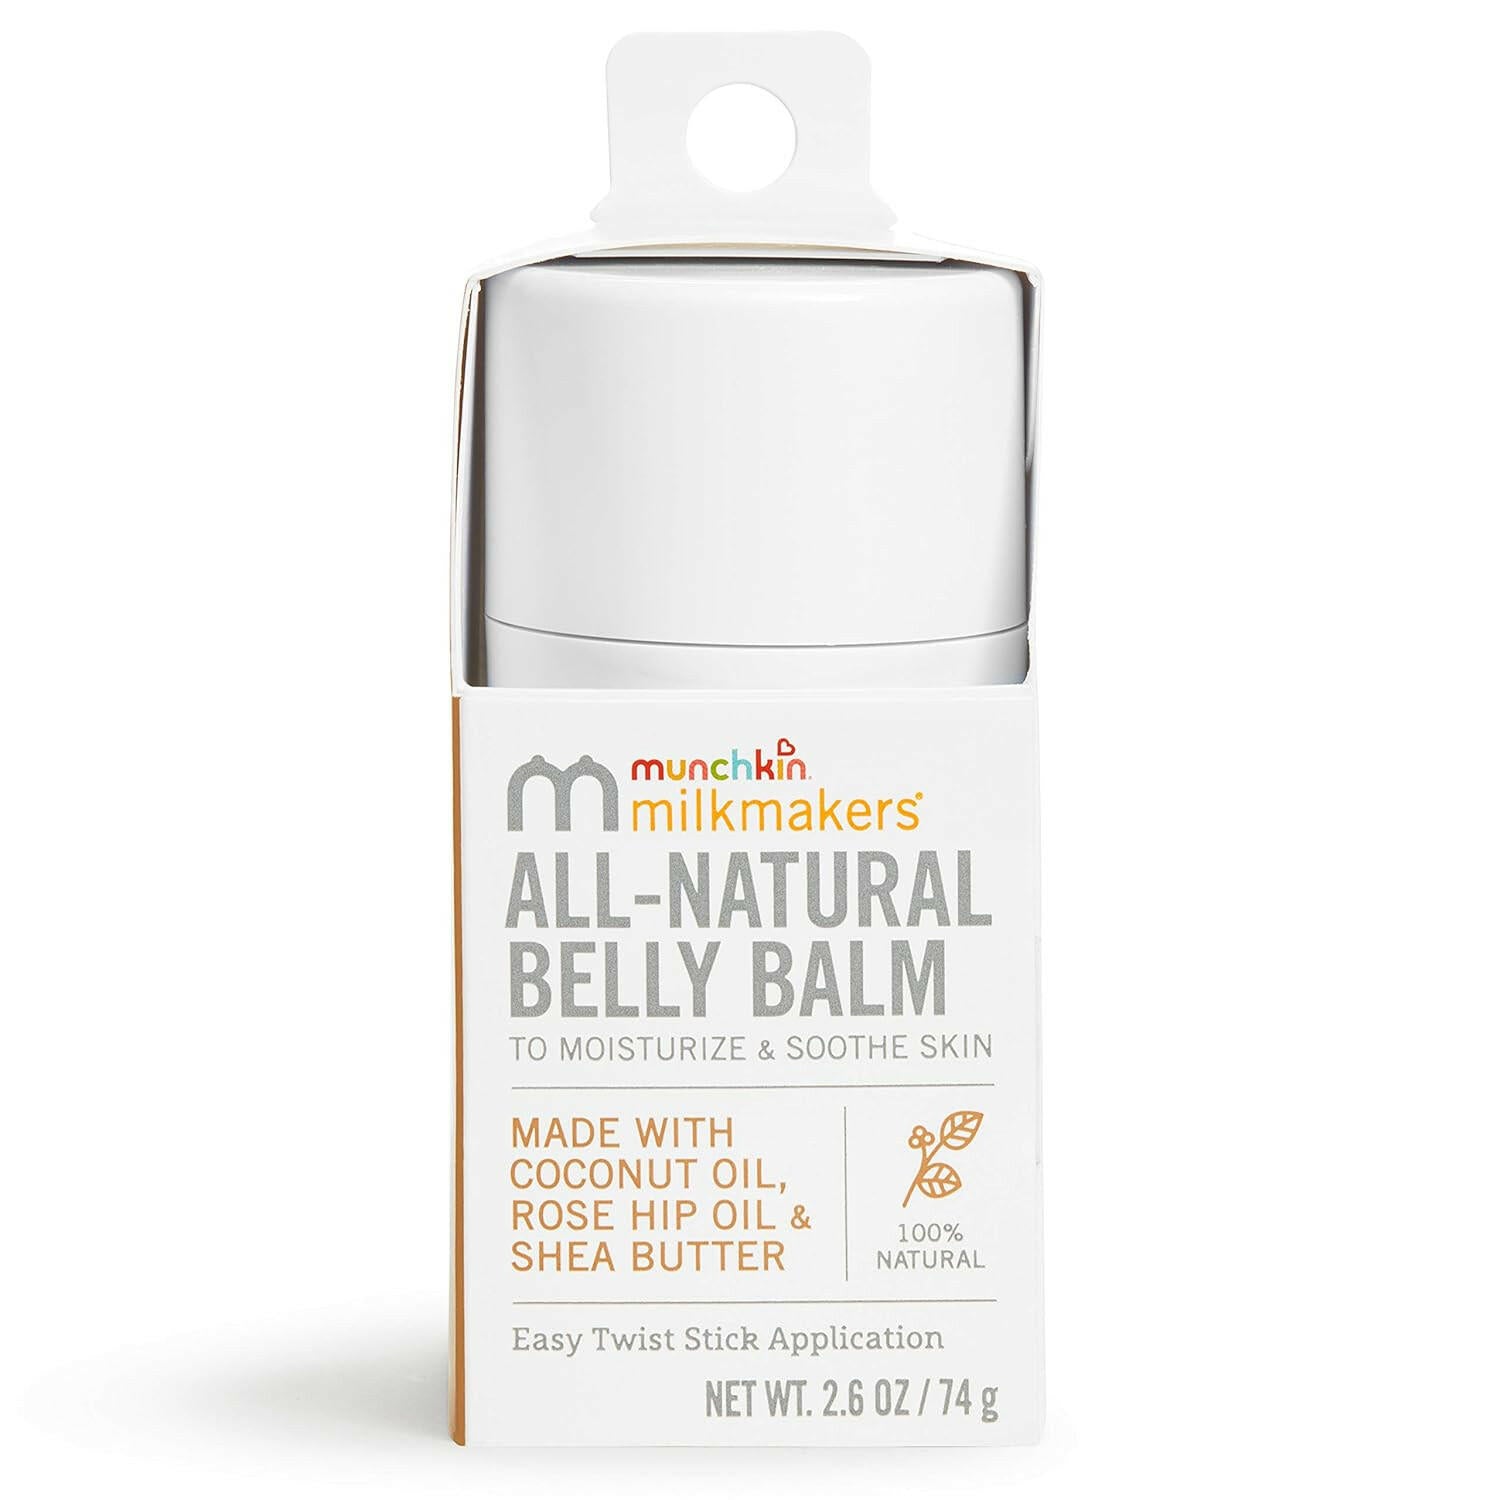 Munchkin Milkmakers Twist-Stick Belly Balm All Natural and Moisturizing for Pregnancy Skincare